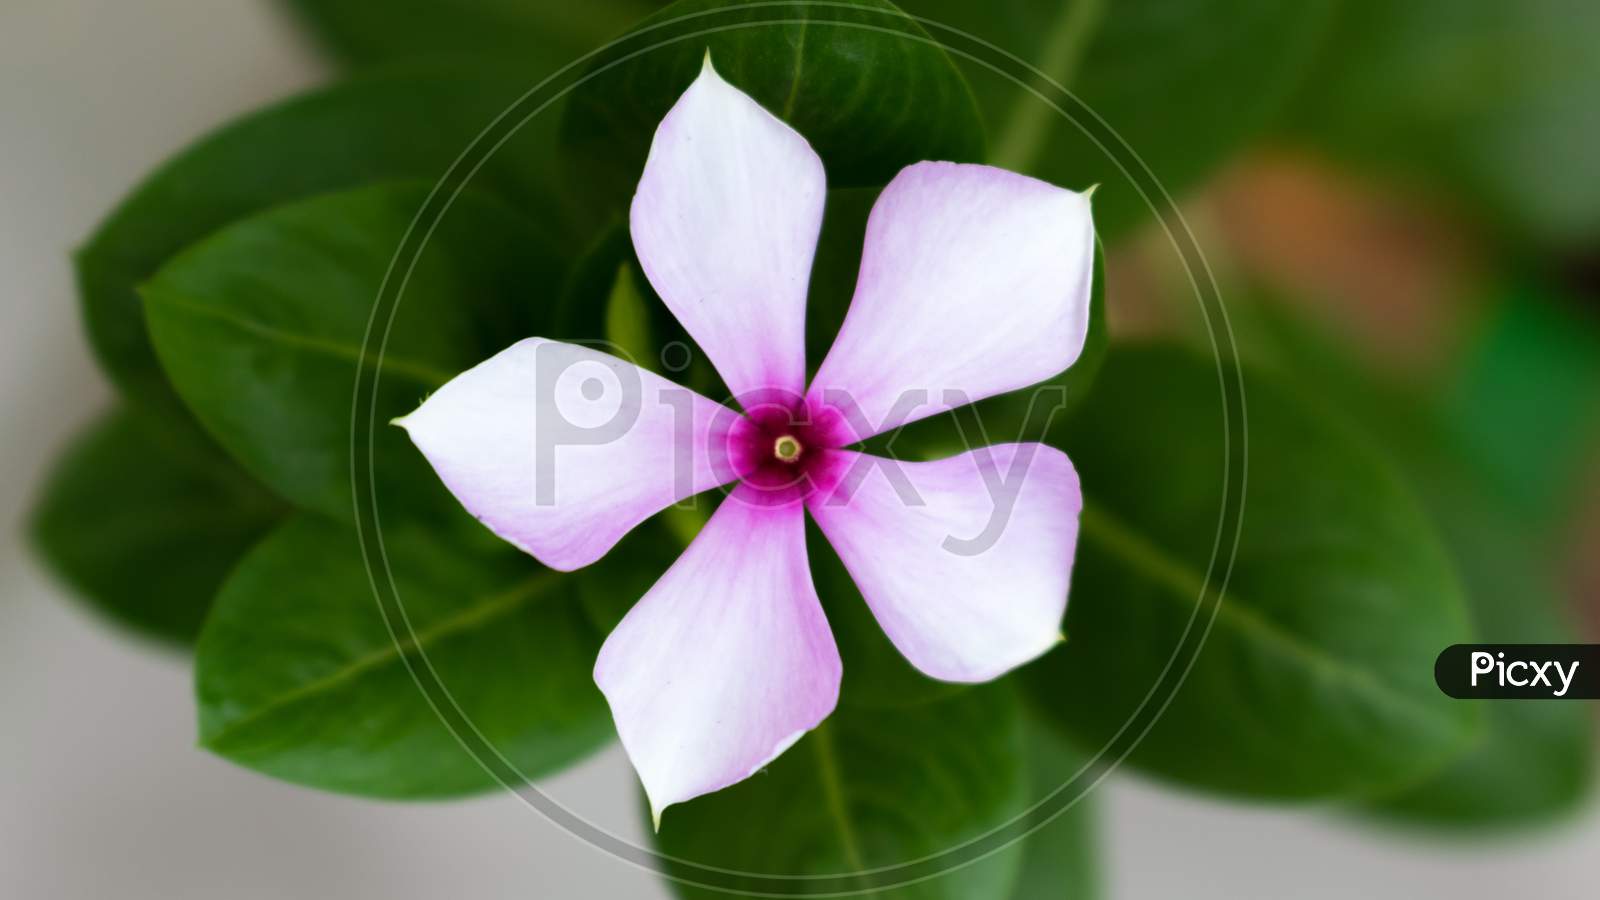 beautiful pink flower sadabhar or rose periwinkle,Catharanthus roseus, commonly known as bright eyes, Cape periwinkle, graveyard plant, Madagascar periwinkle, old maid, pink periwinkle view.